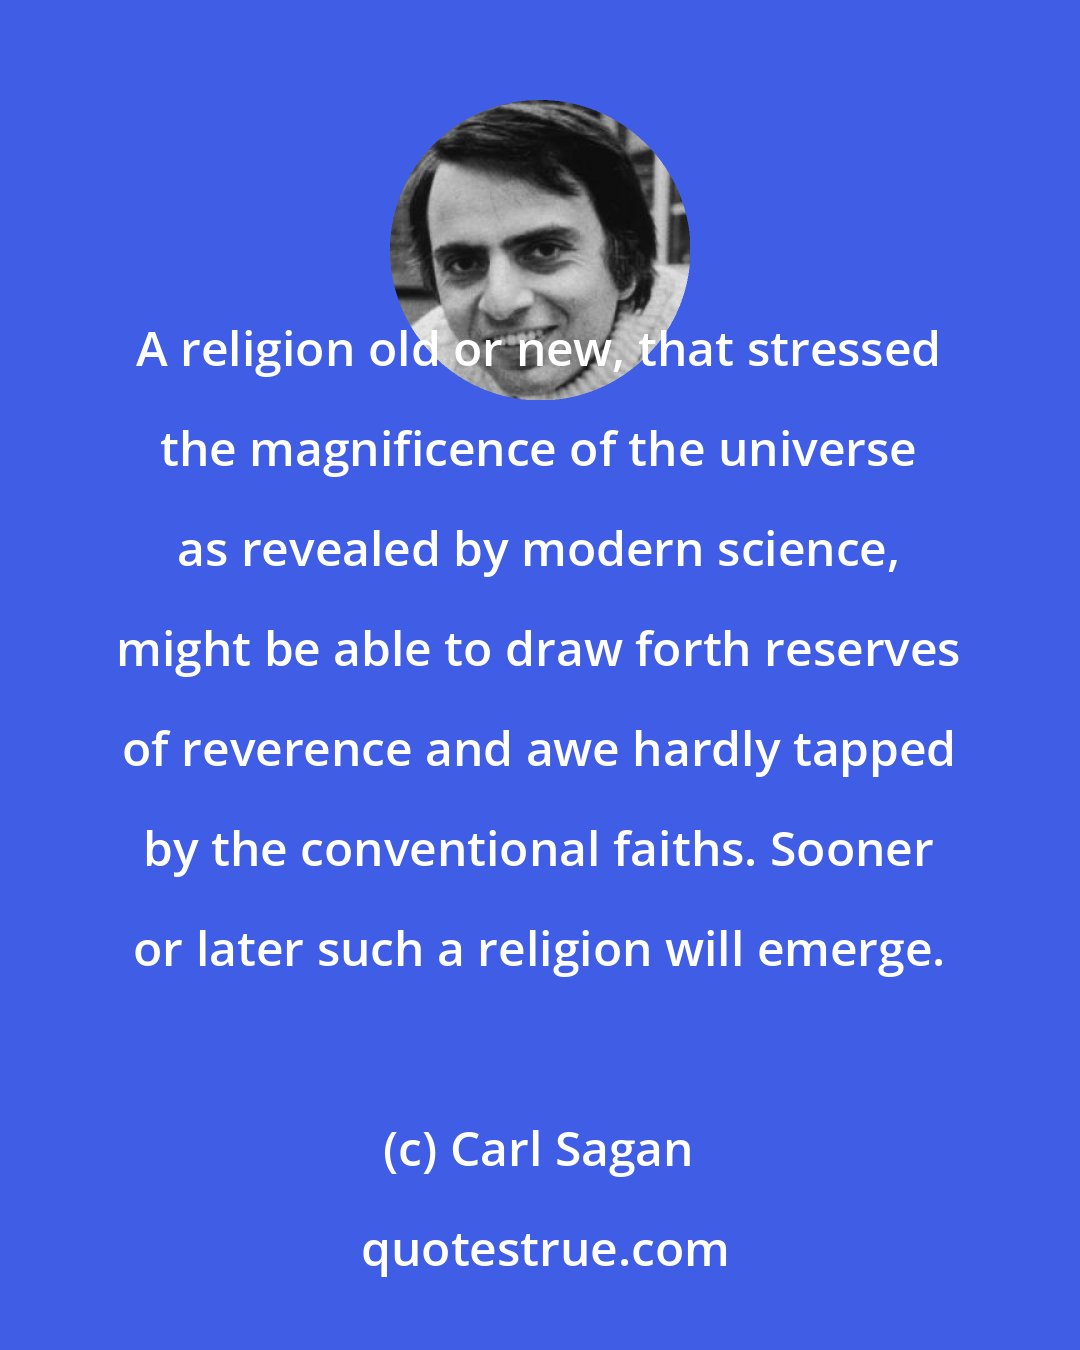 Carl Sagan: A religion old or new, that stressed the magnificence of the universe as revealed by modern science, might be able to draw forth reserves of reverence and awe hardly tapped by the conventional faiths. Sooner or later such a religion will emerge.